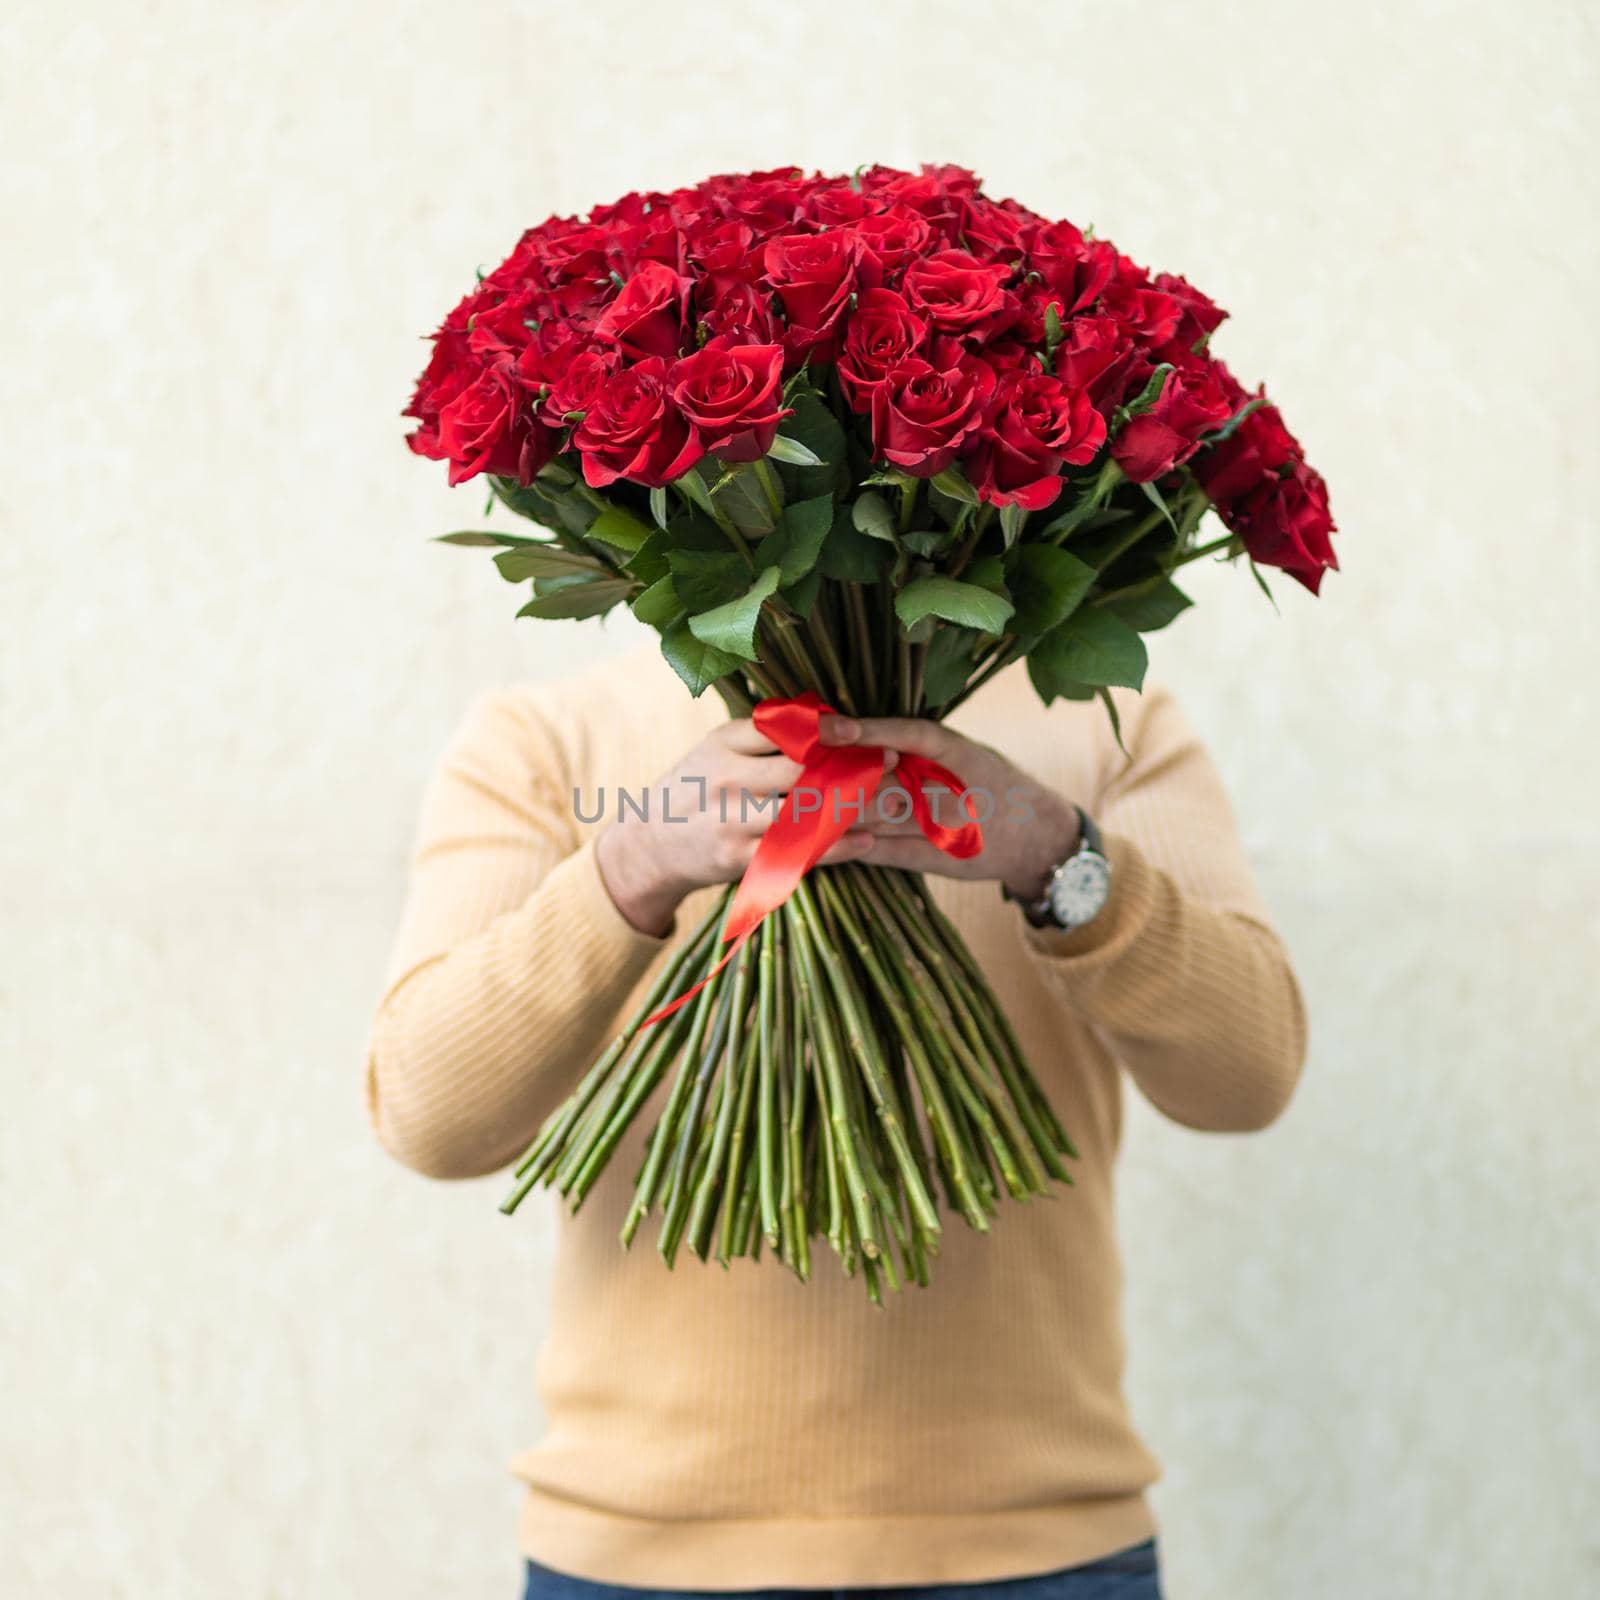 Man holding red rose bouquet